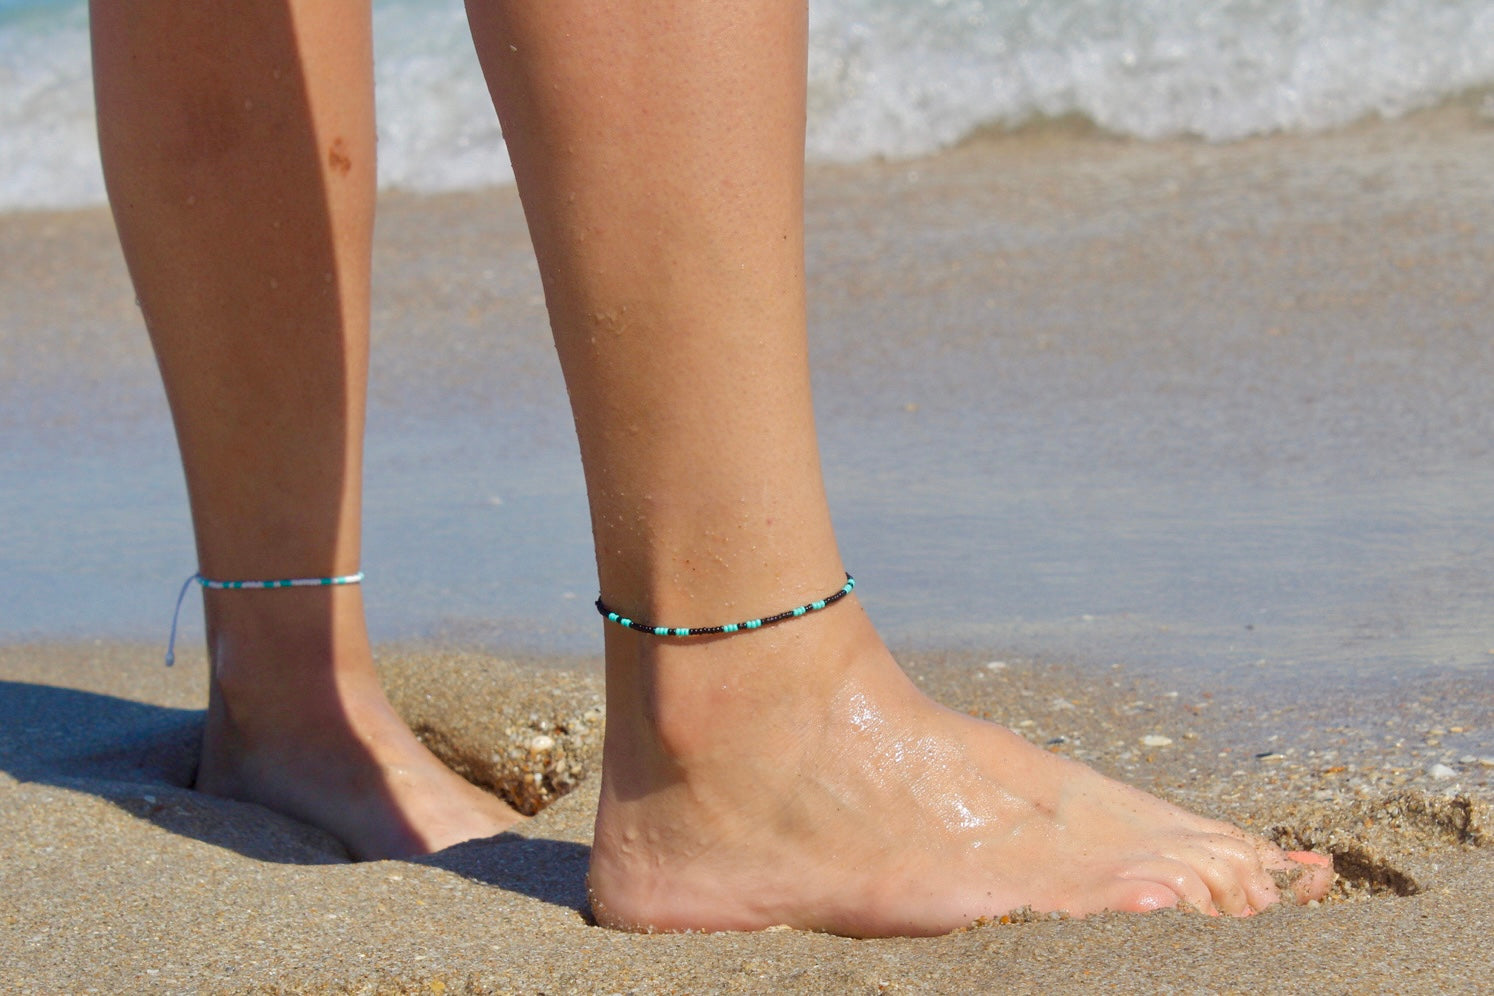 Ankle Bracelets for Women After 40 - Stylish or Silly?